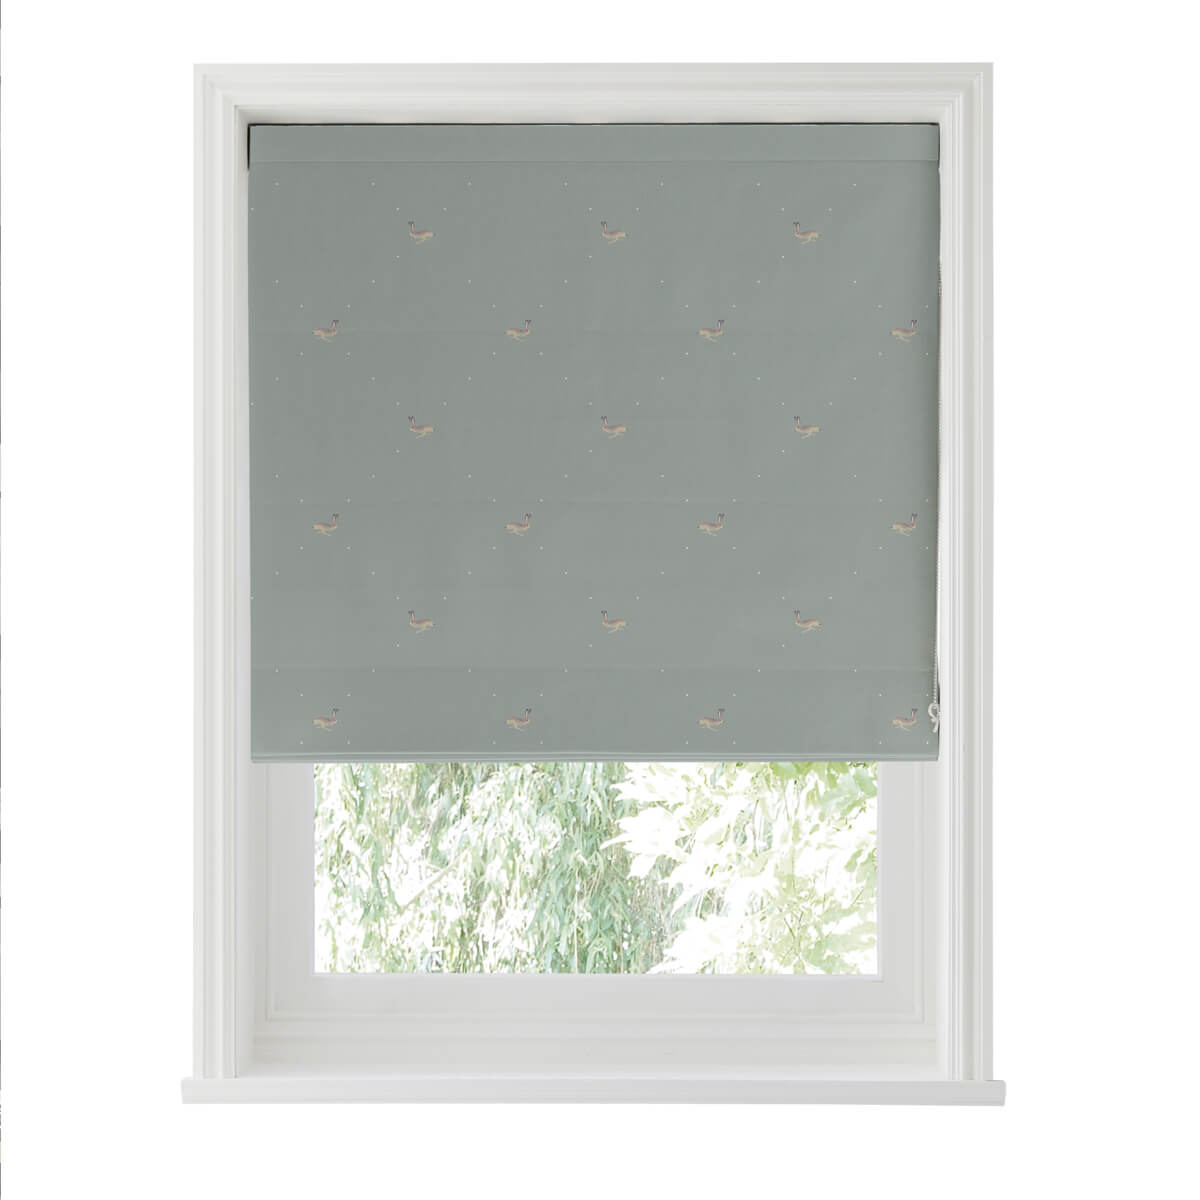 Hare Teal Blue Made to Measure Roman Blind